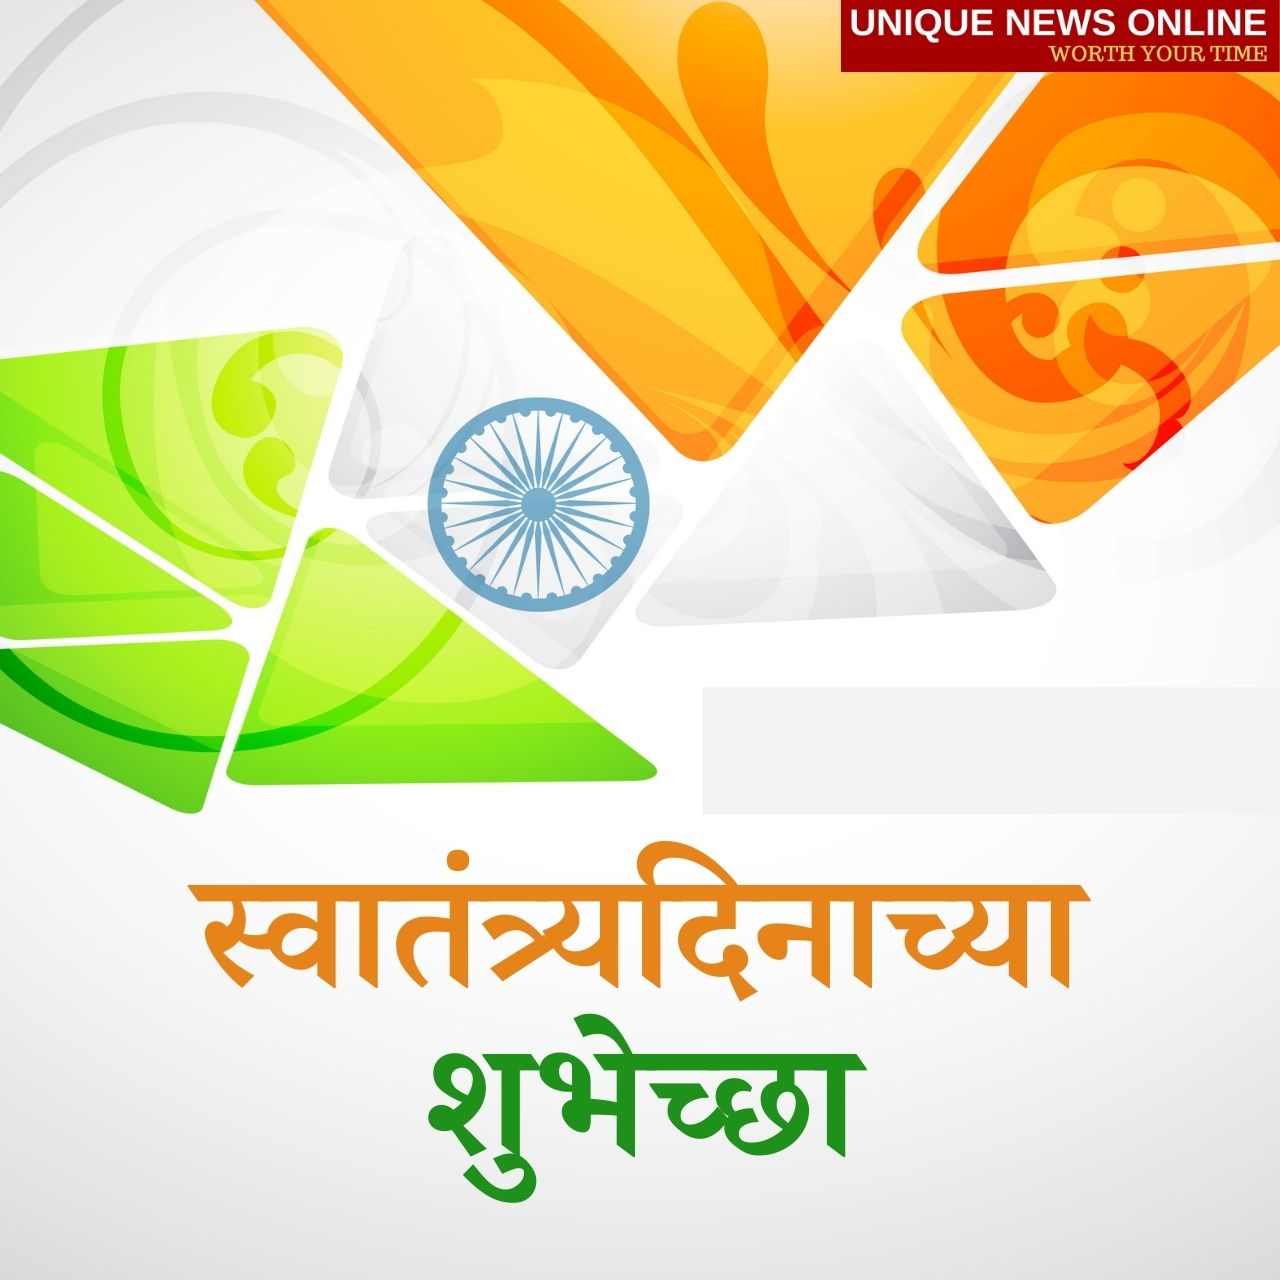 Swatantra Dinachya Hardik Shubhechha 2021 Marathi Wishes, HD Images, Status, Shayari, Quotes, Greetings, Messages, Poster, and Gif for 75th Indian Independence Day